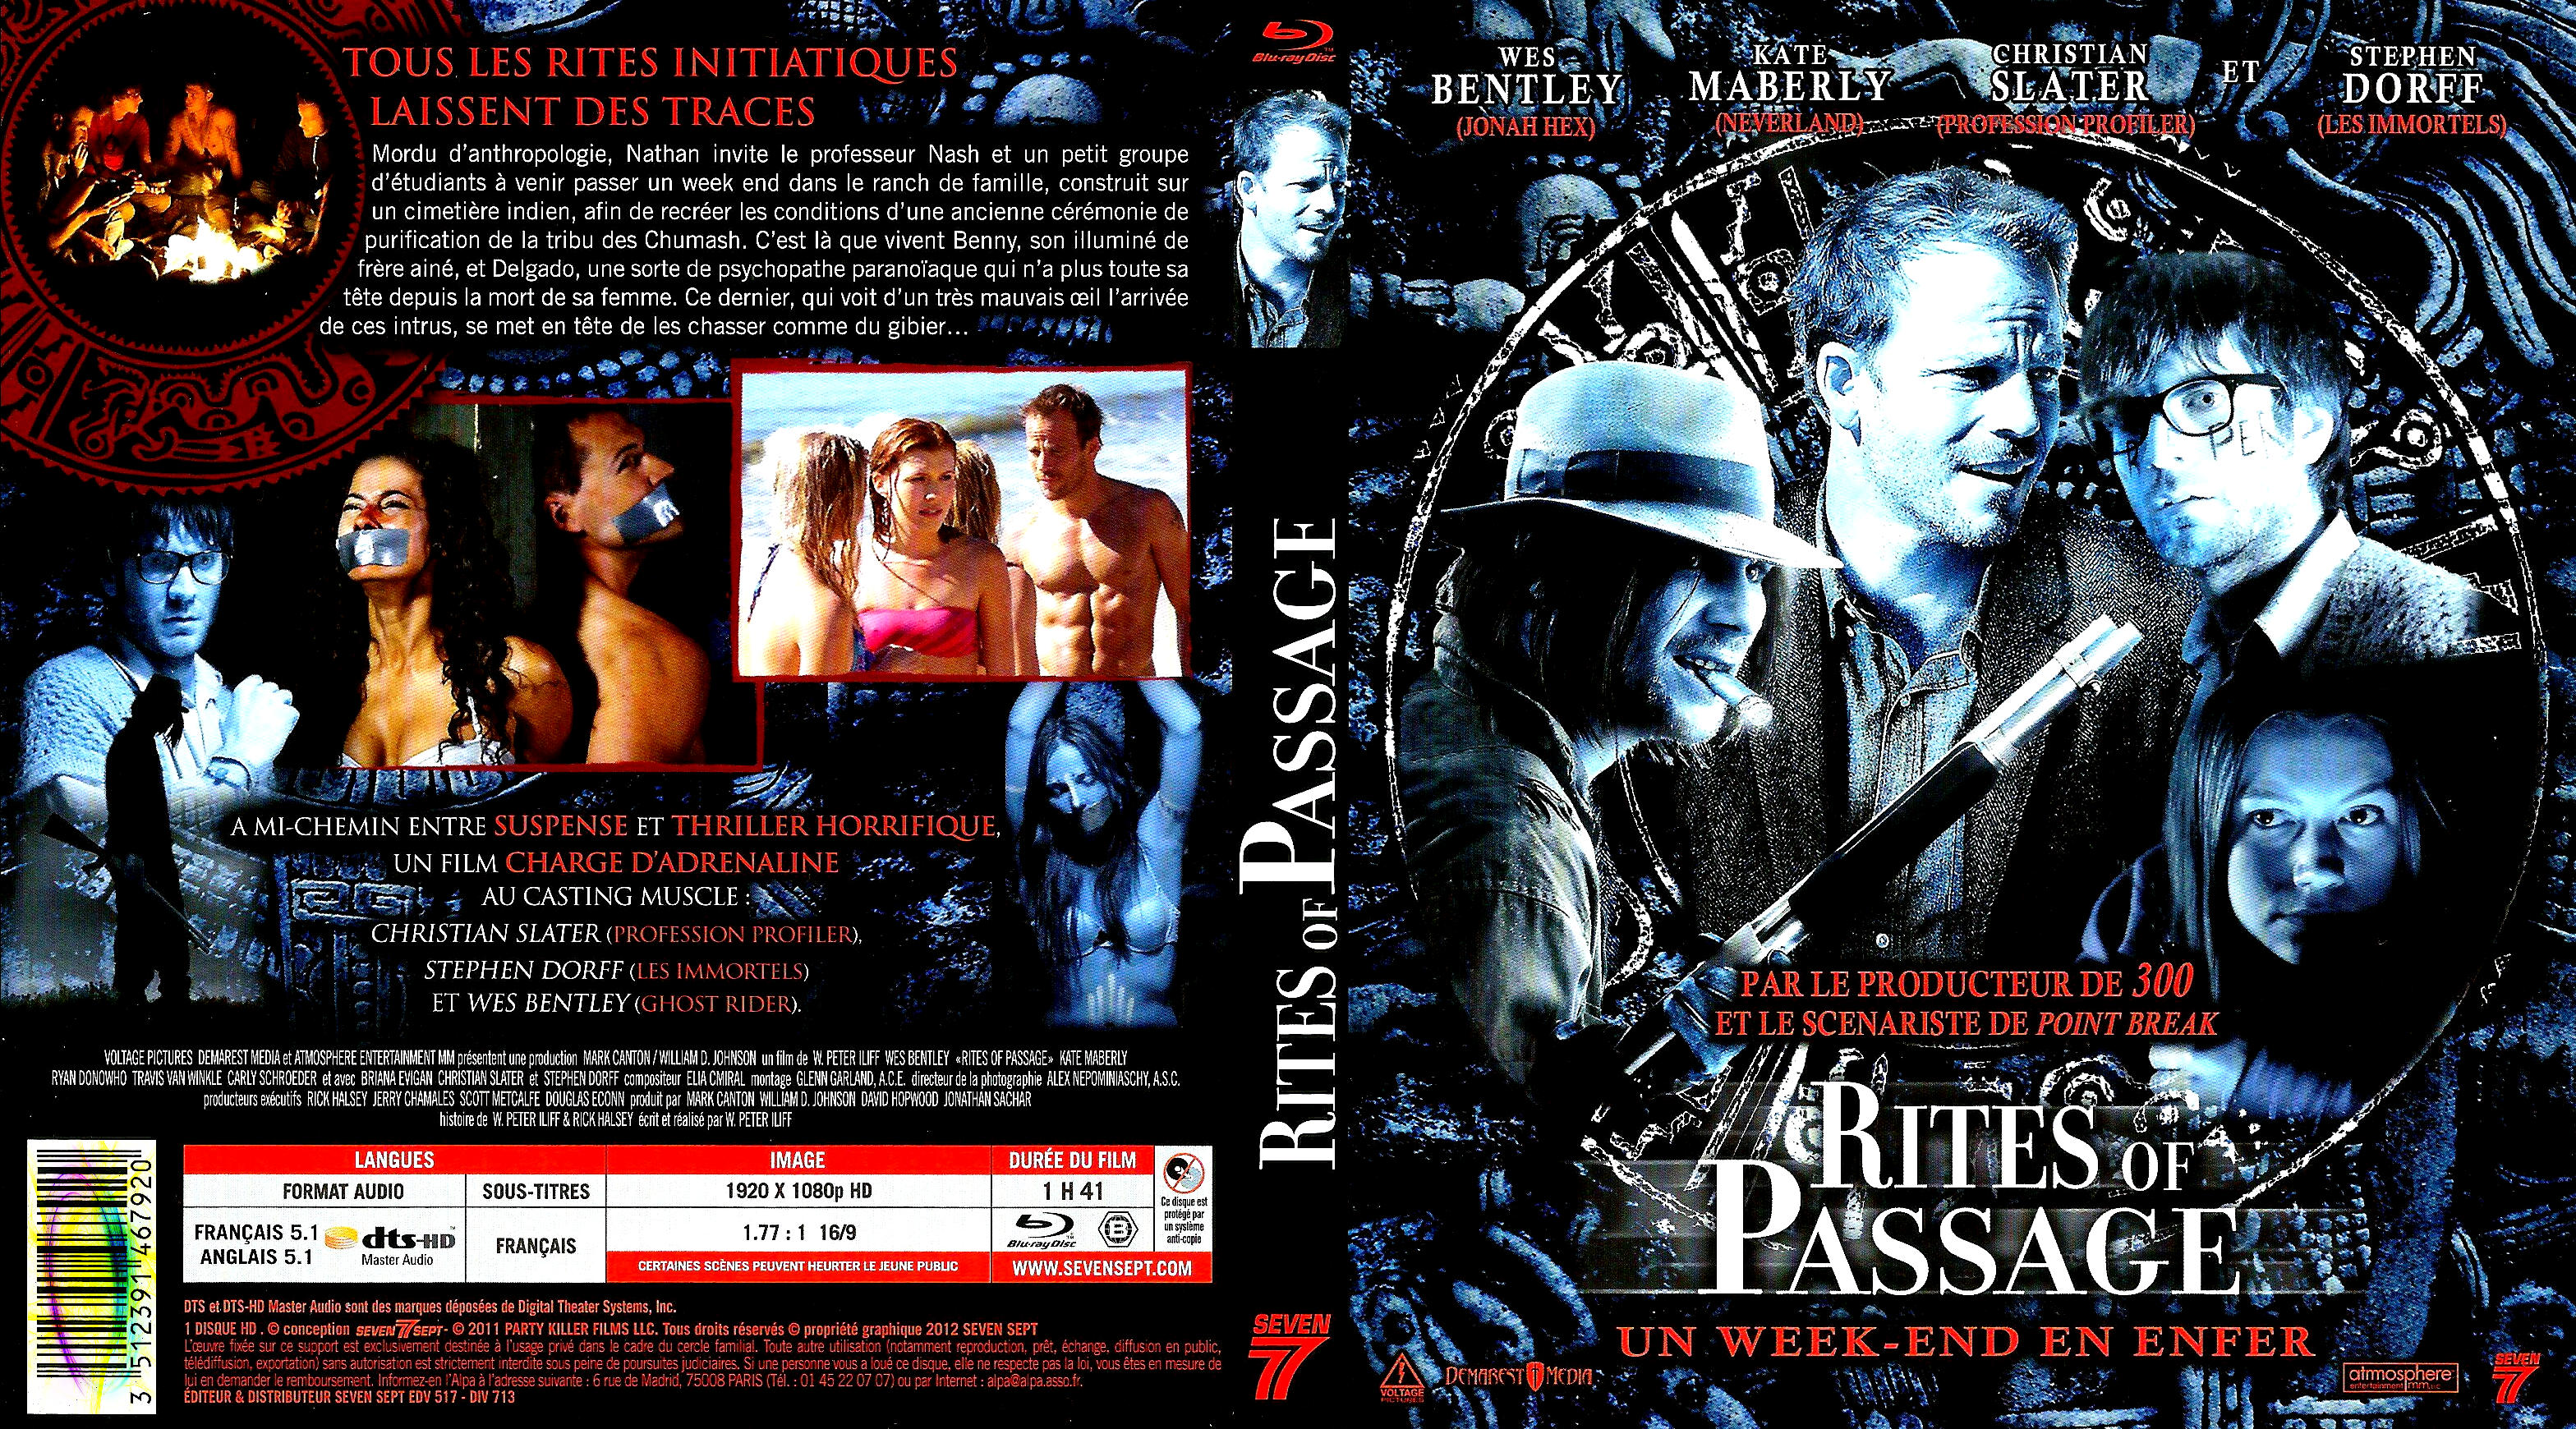 Jaquette DVD Rites of passage (BLU-RAY)